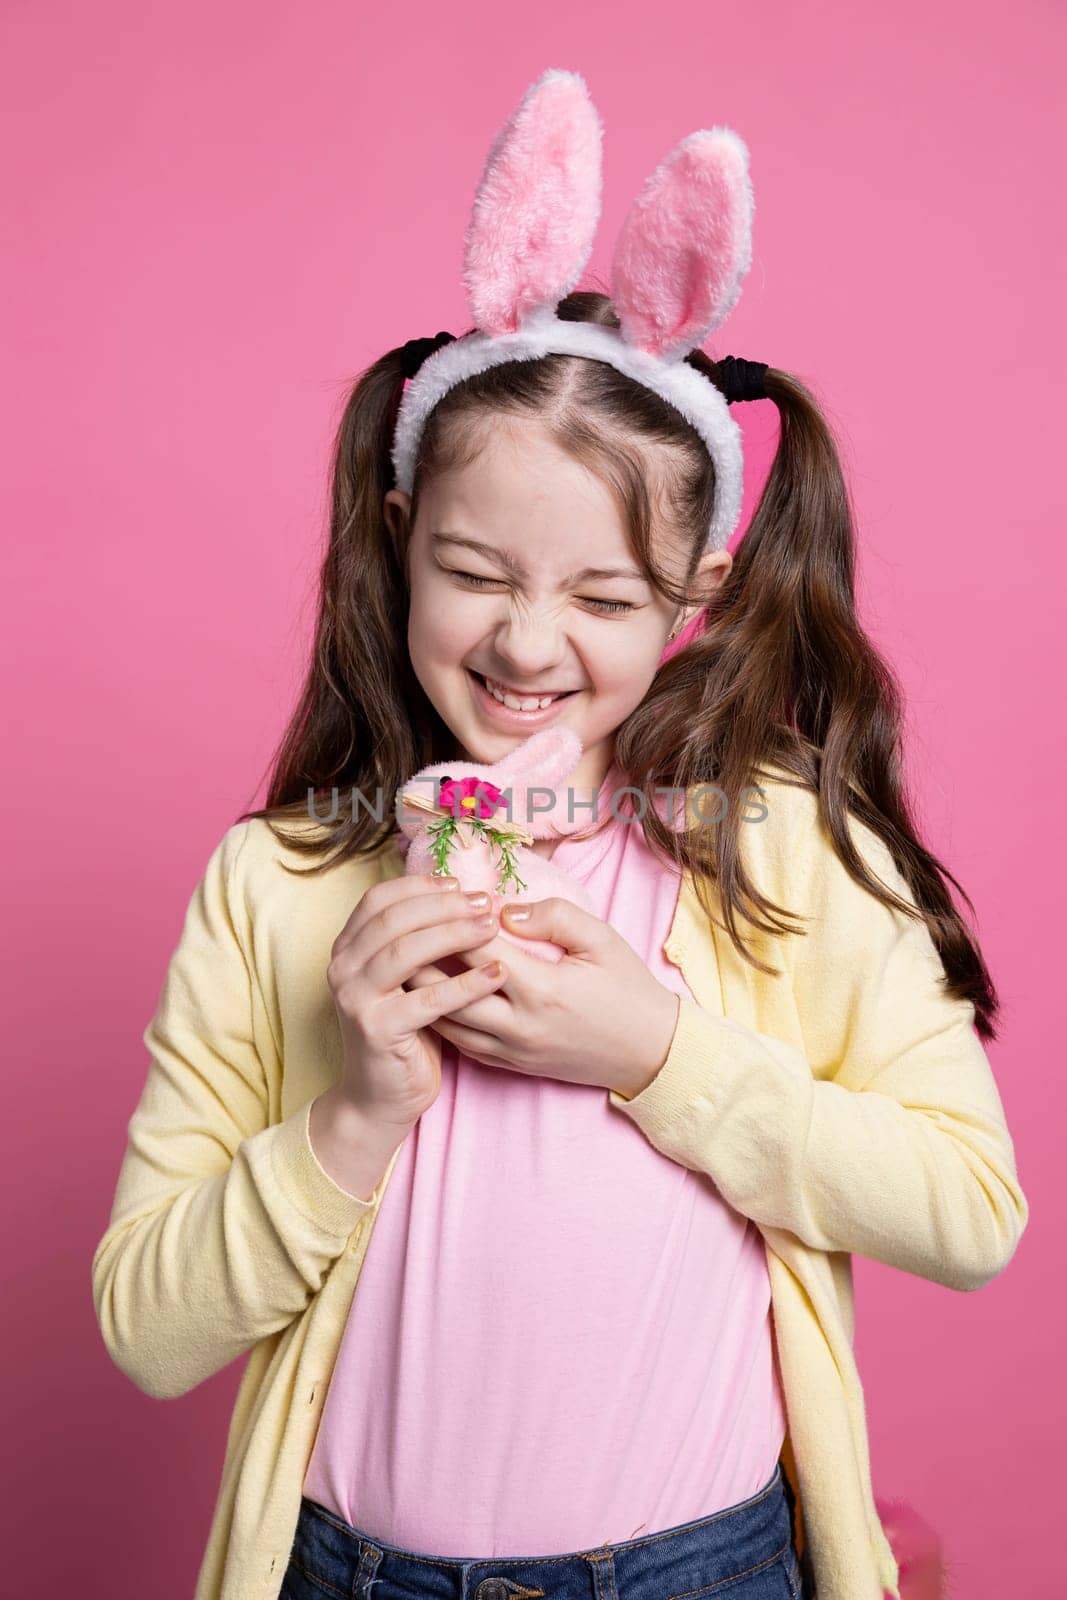 Smiling young child embracing a stuffed rabbit toy in studio by DCStudio